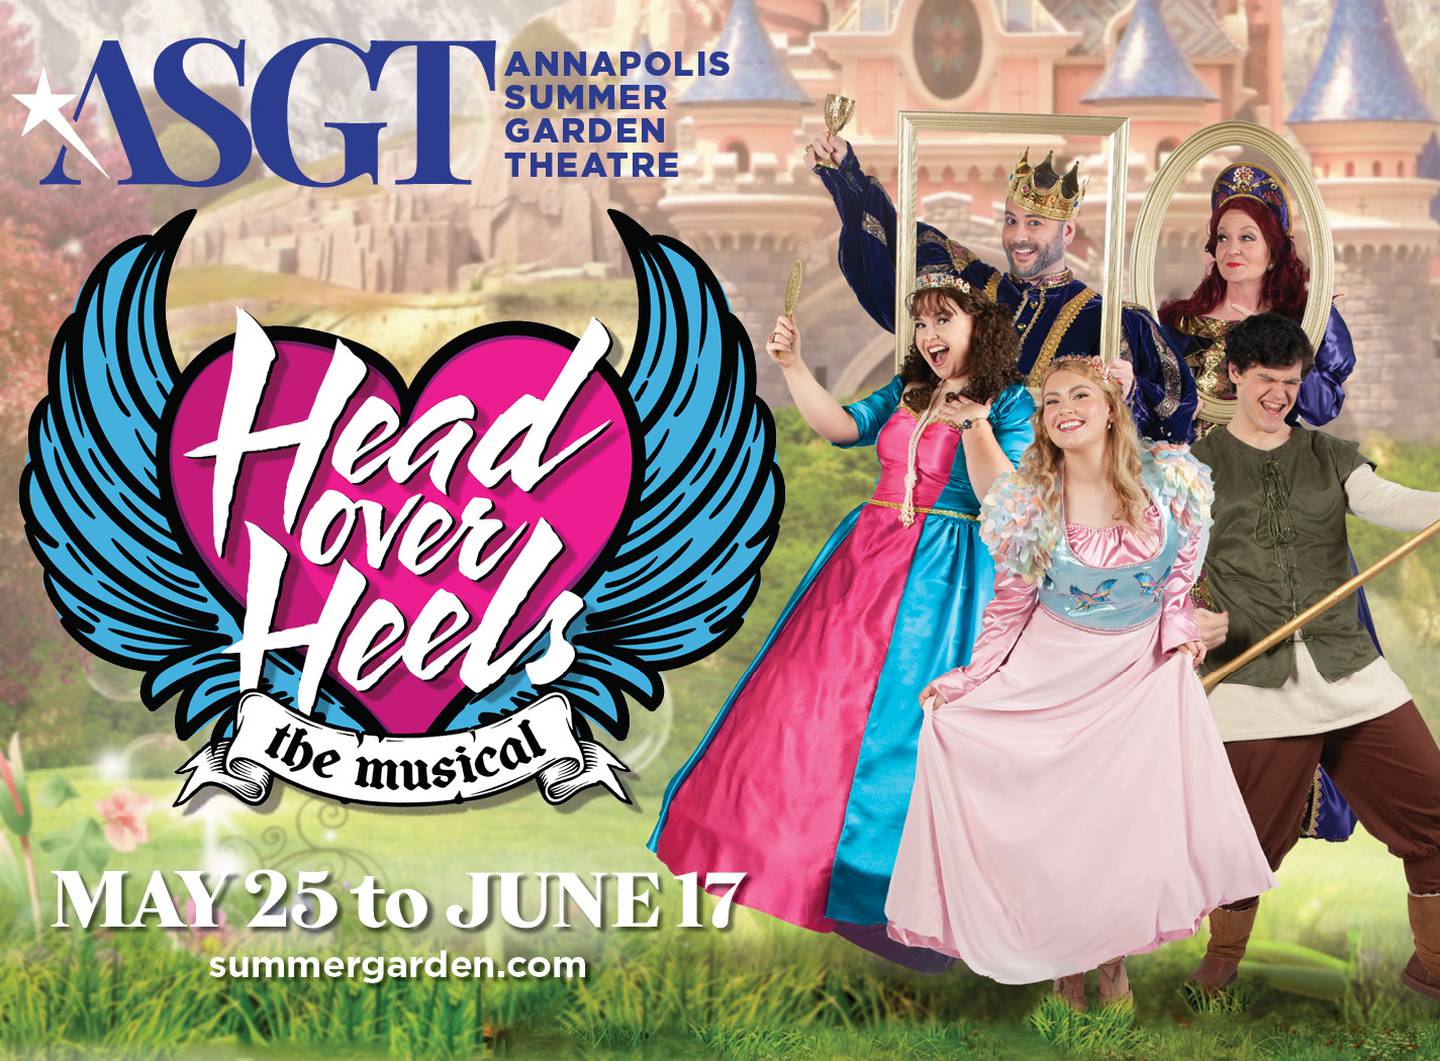 Annapolis Summer Garden Theatre, the city’s oldest running outdoor theater troupe, starts its season Thursday with “Head over Heels,” a new jukebox musical comedy about a royal family on a journey to save their kingdom.